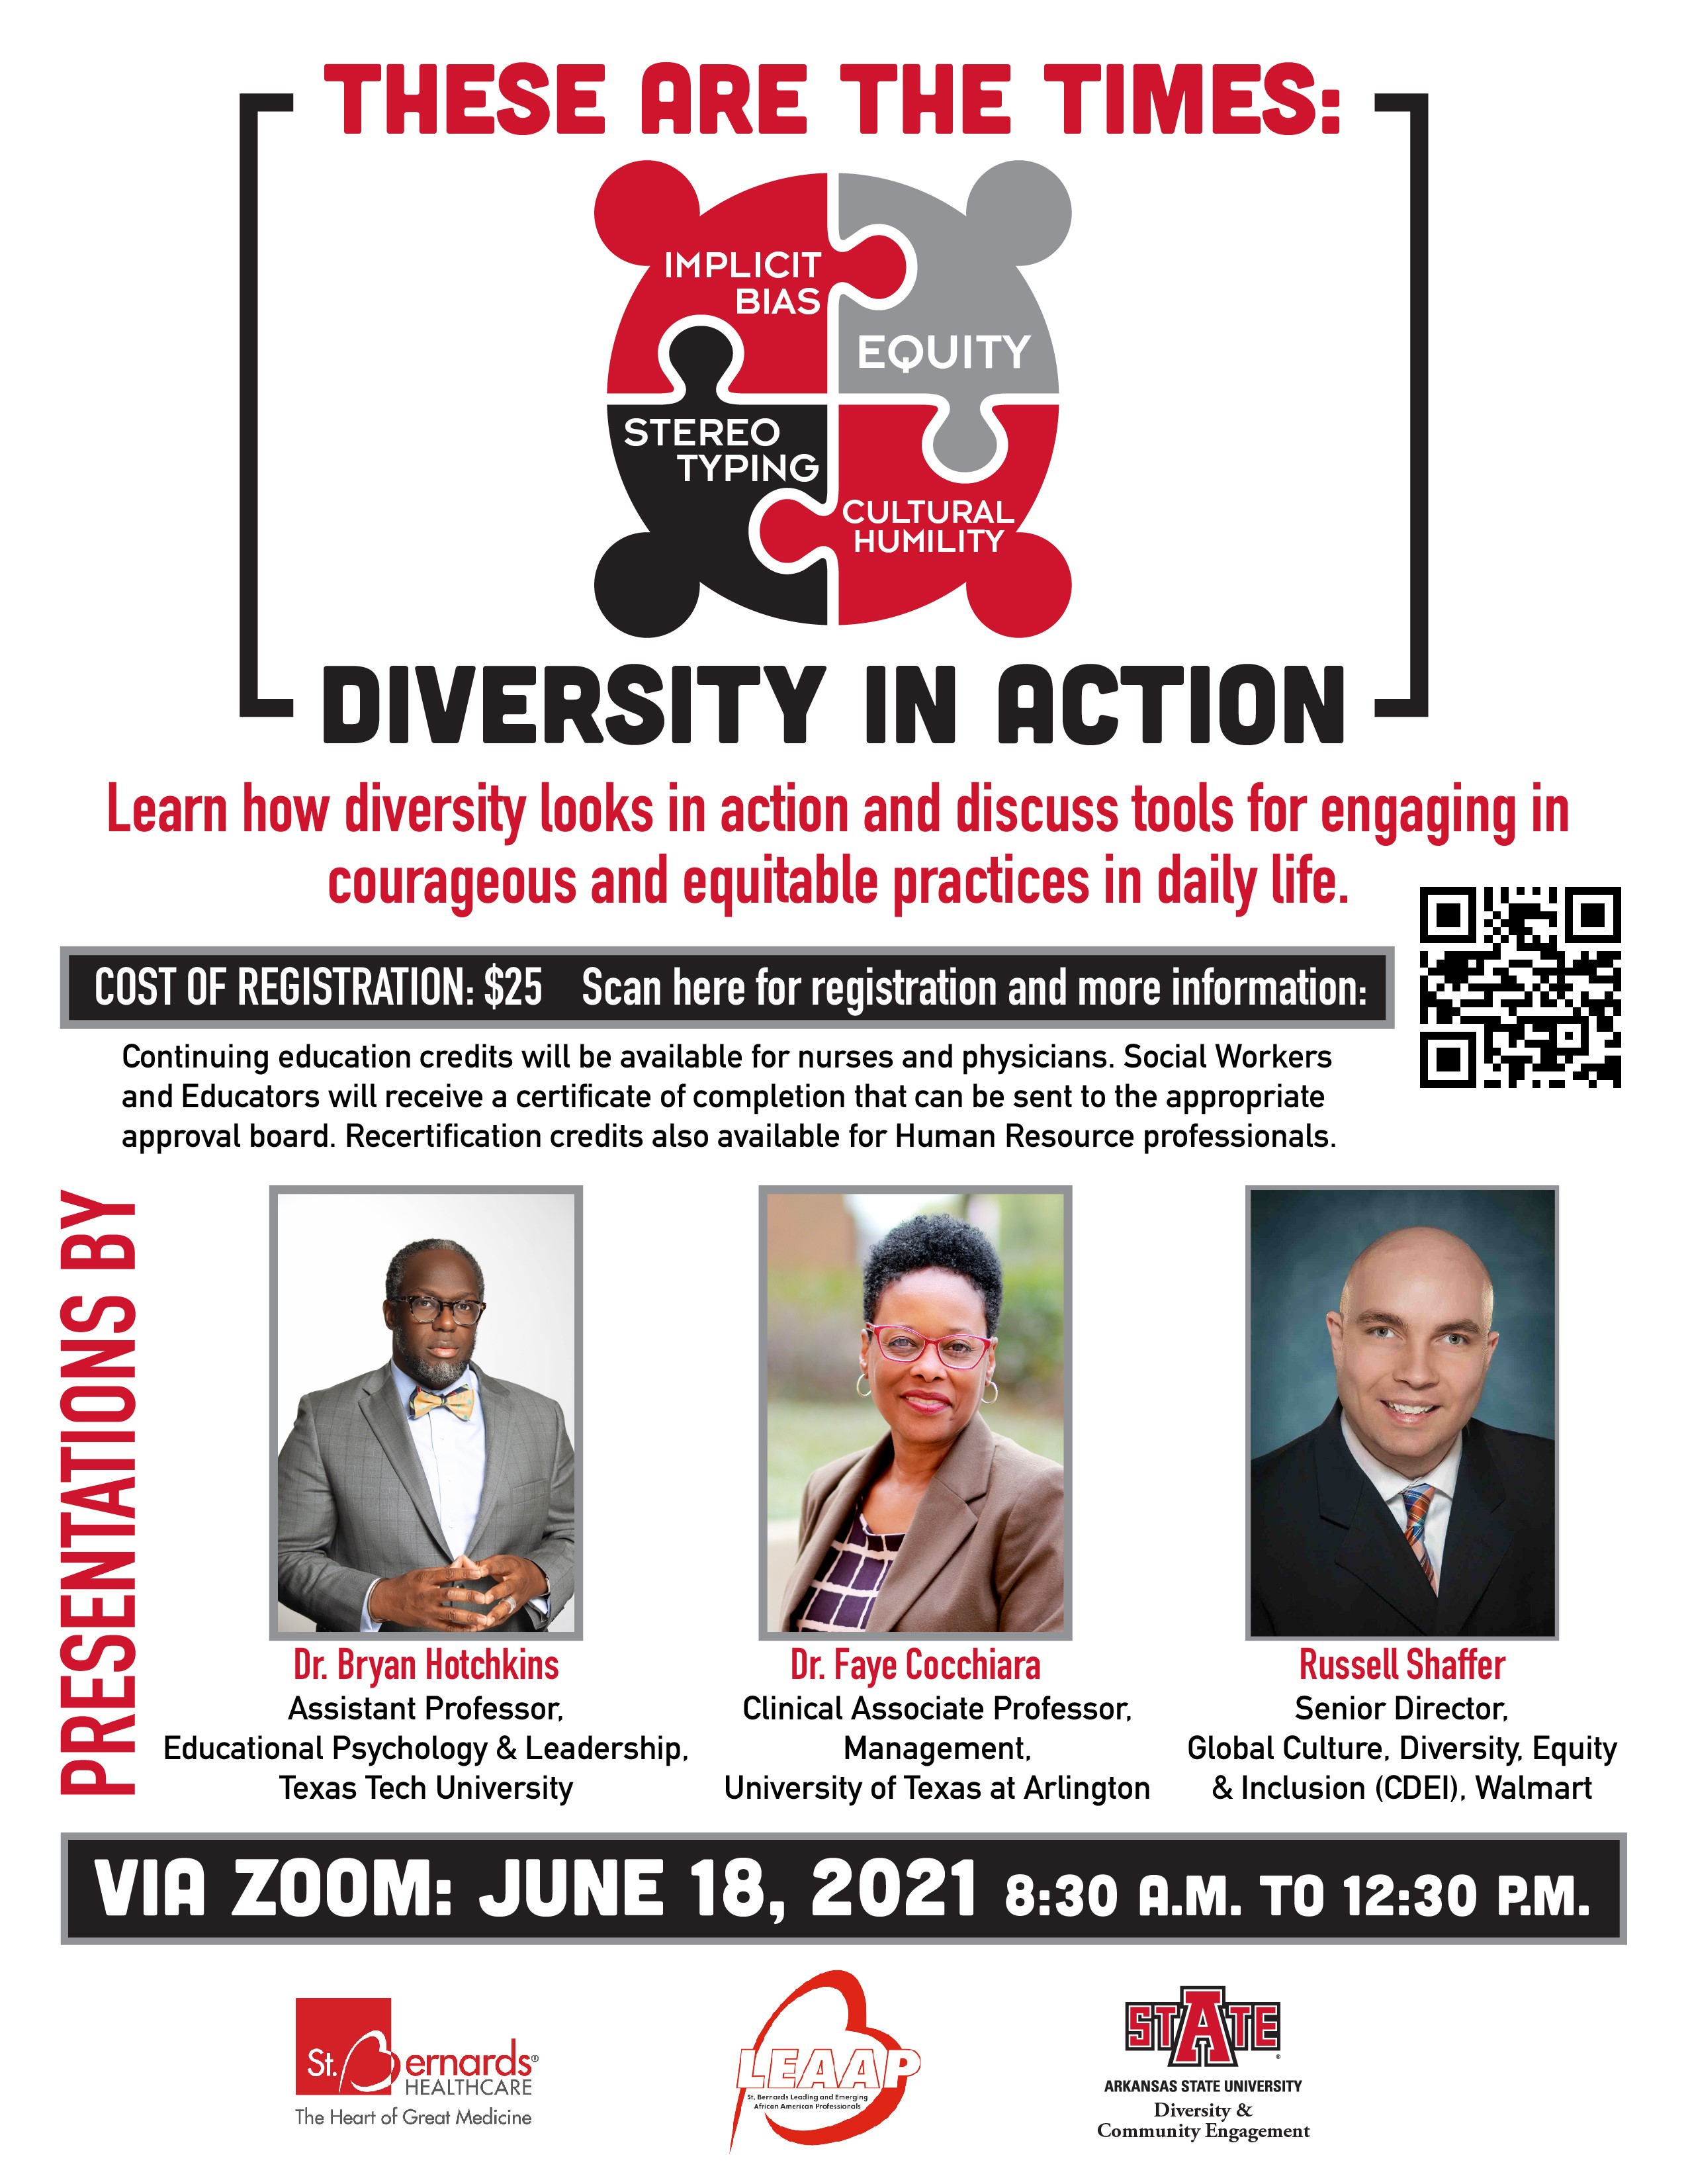 2021 Diversity and Inclusion Conference Set for June 18